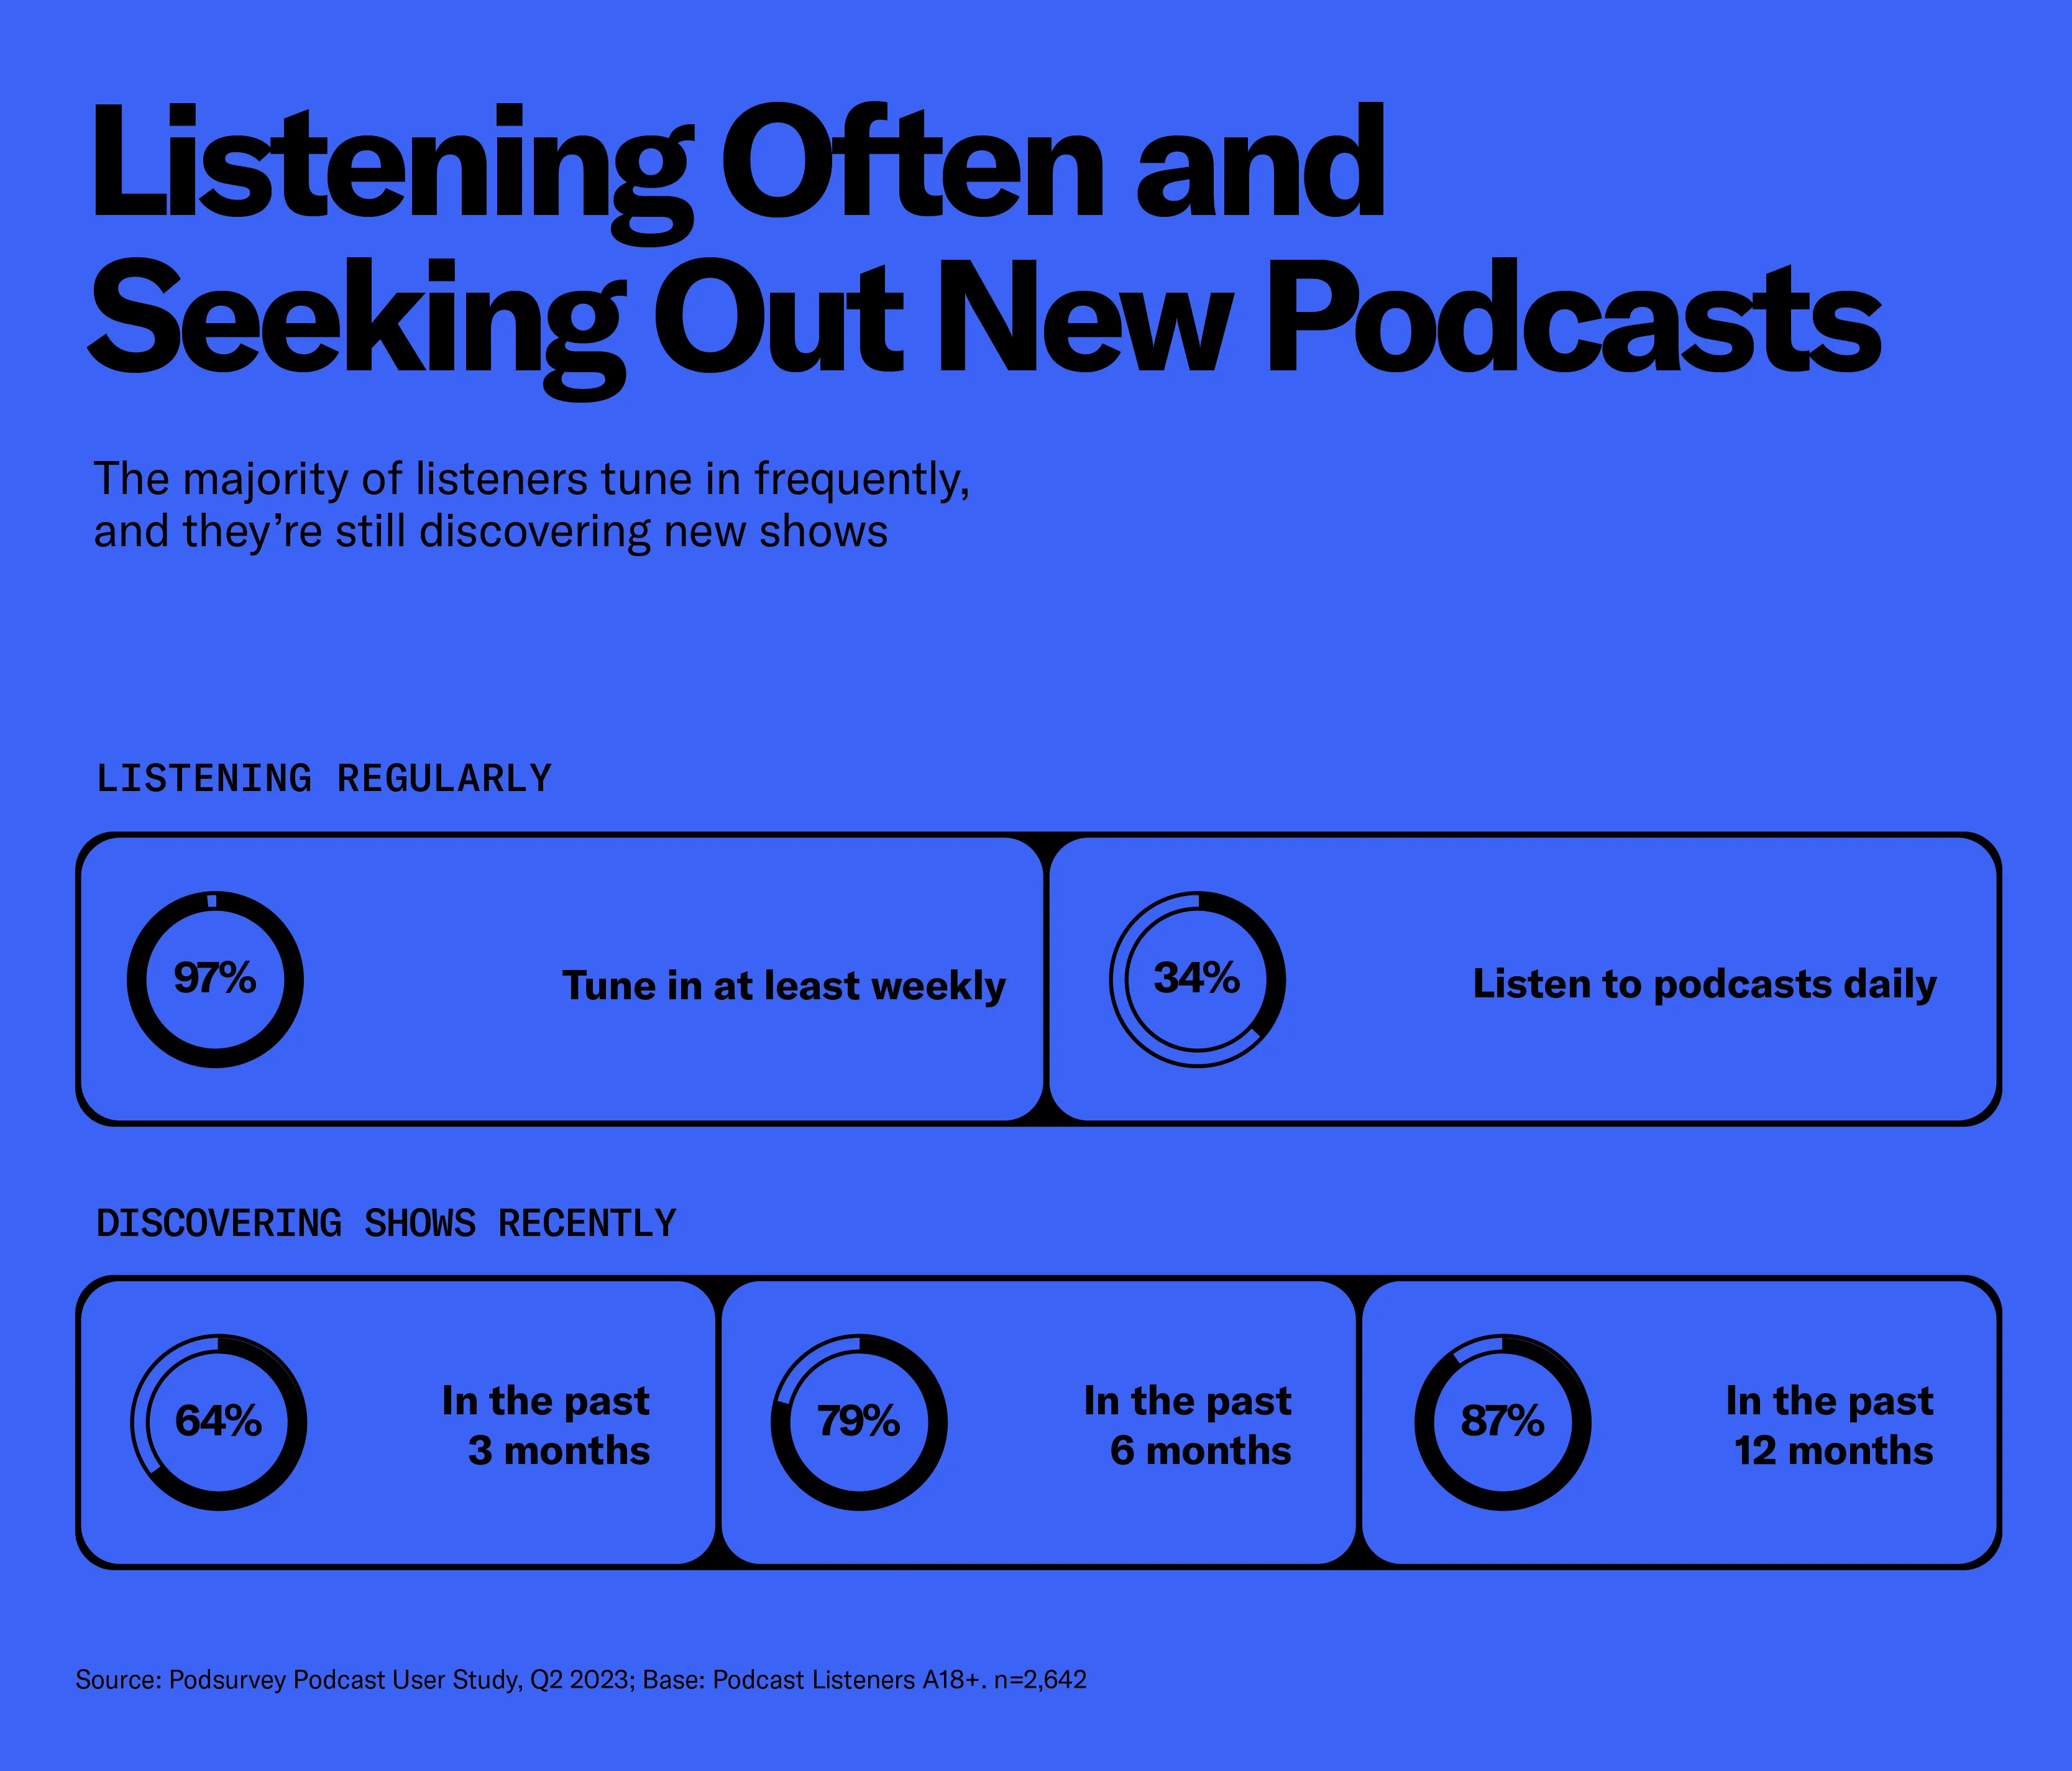 Podcast fans listen often and are looking for new shows